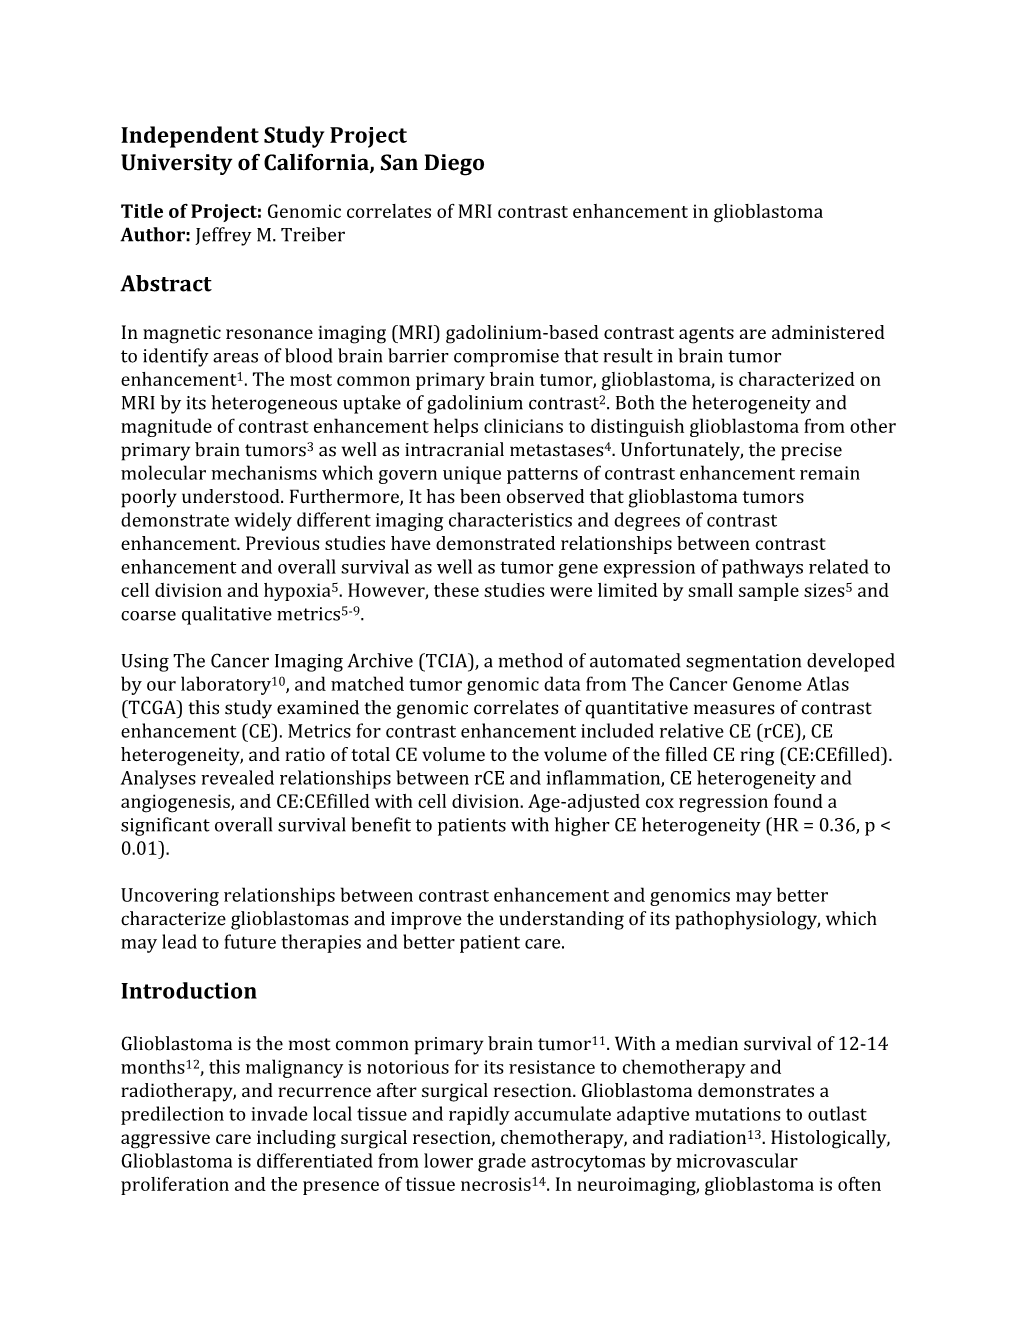 Independent Study Project University of California, San Diego Abstract